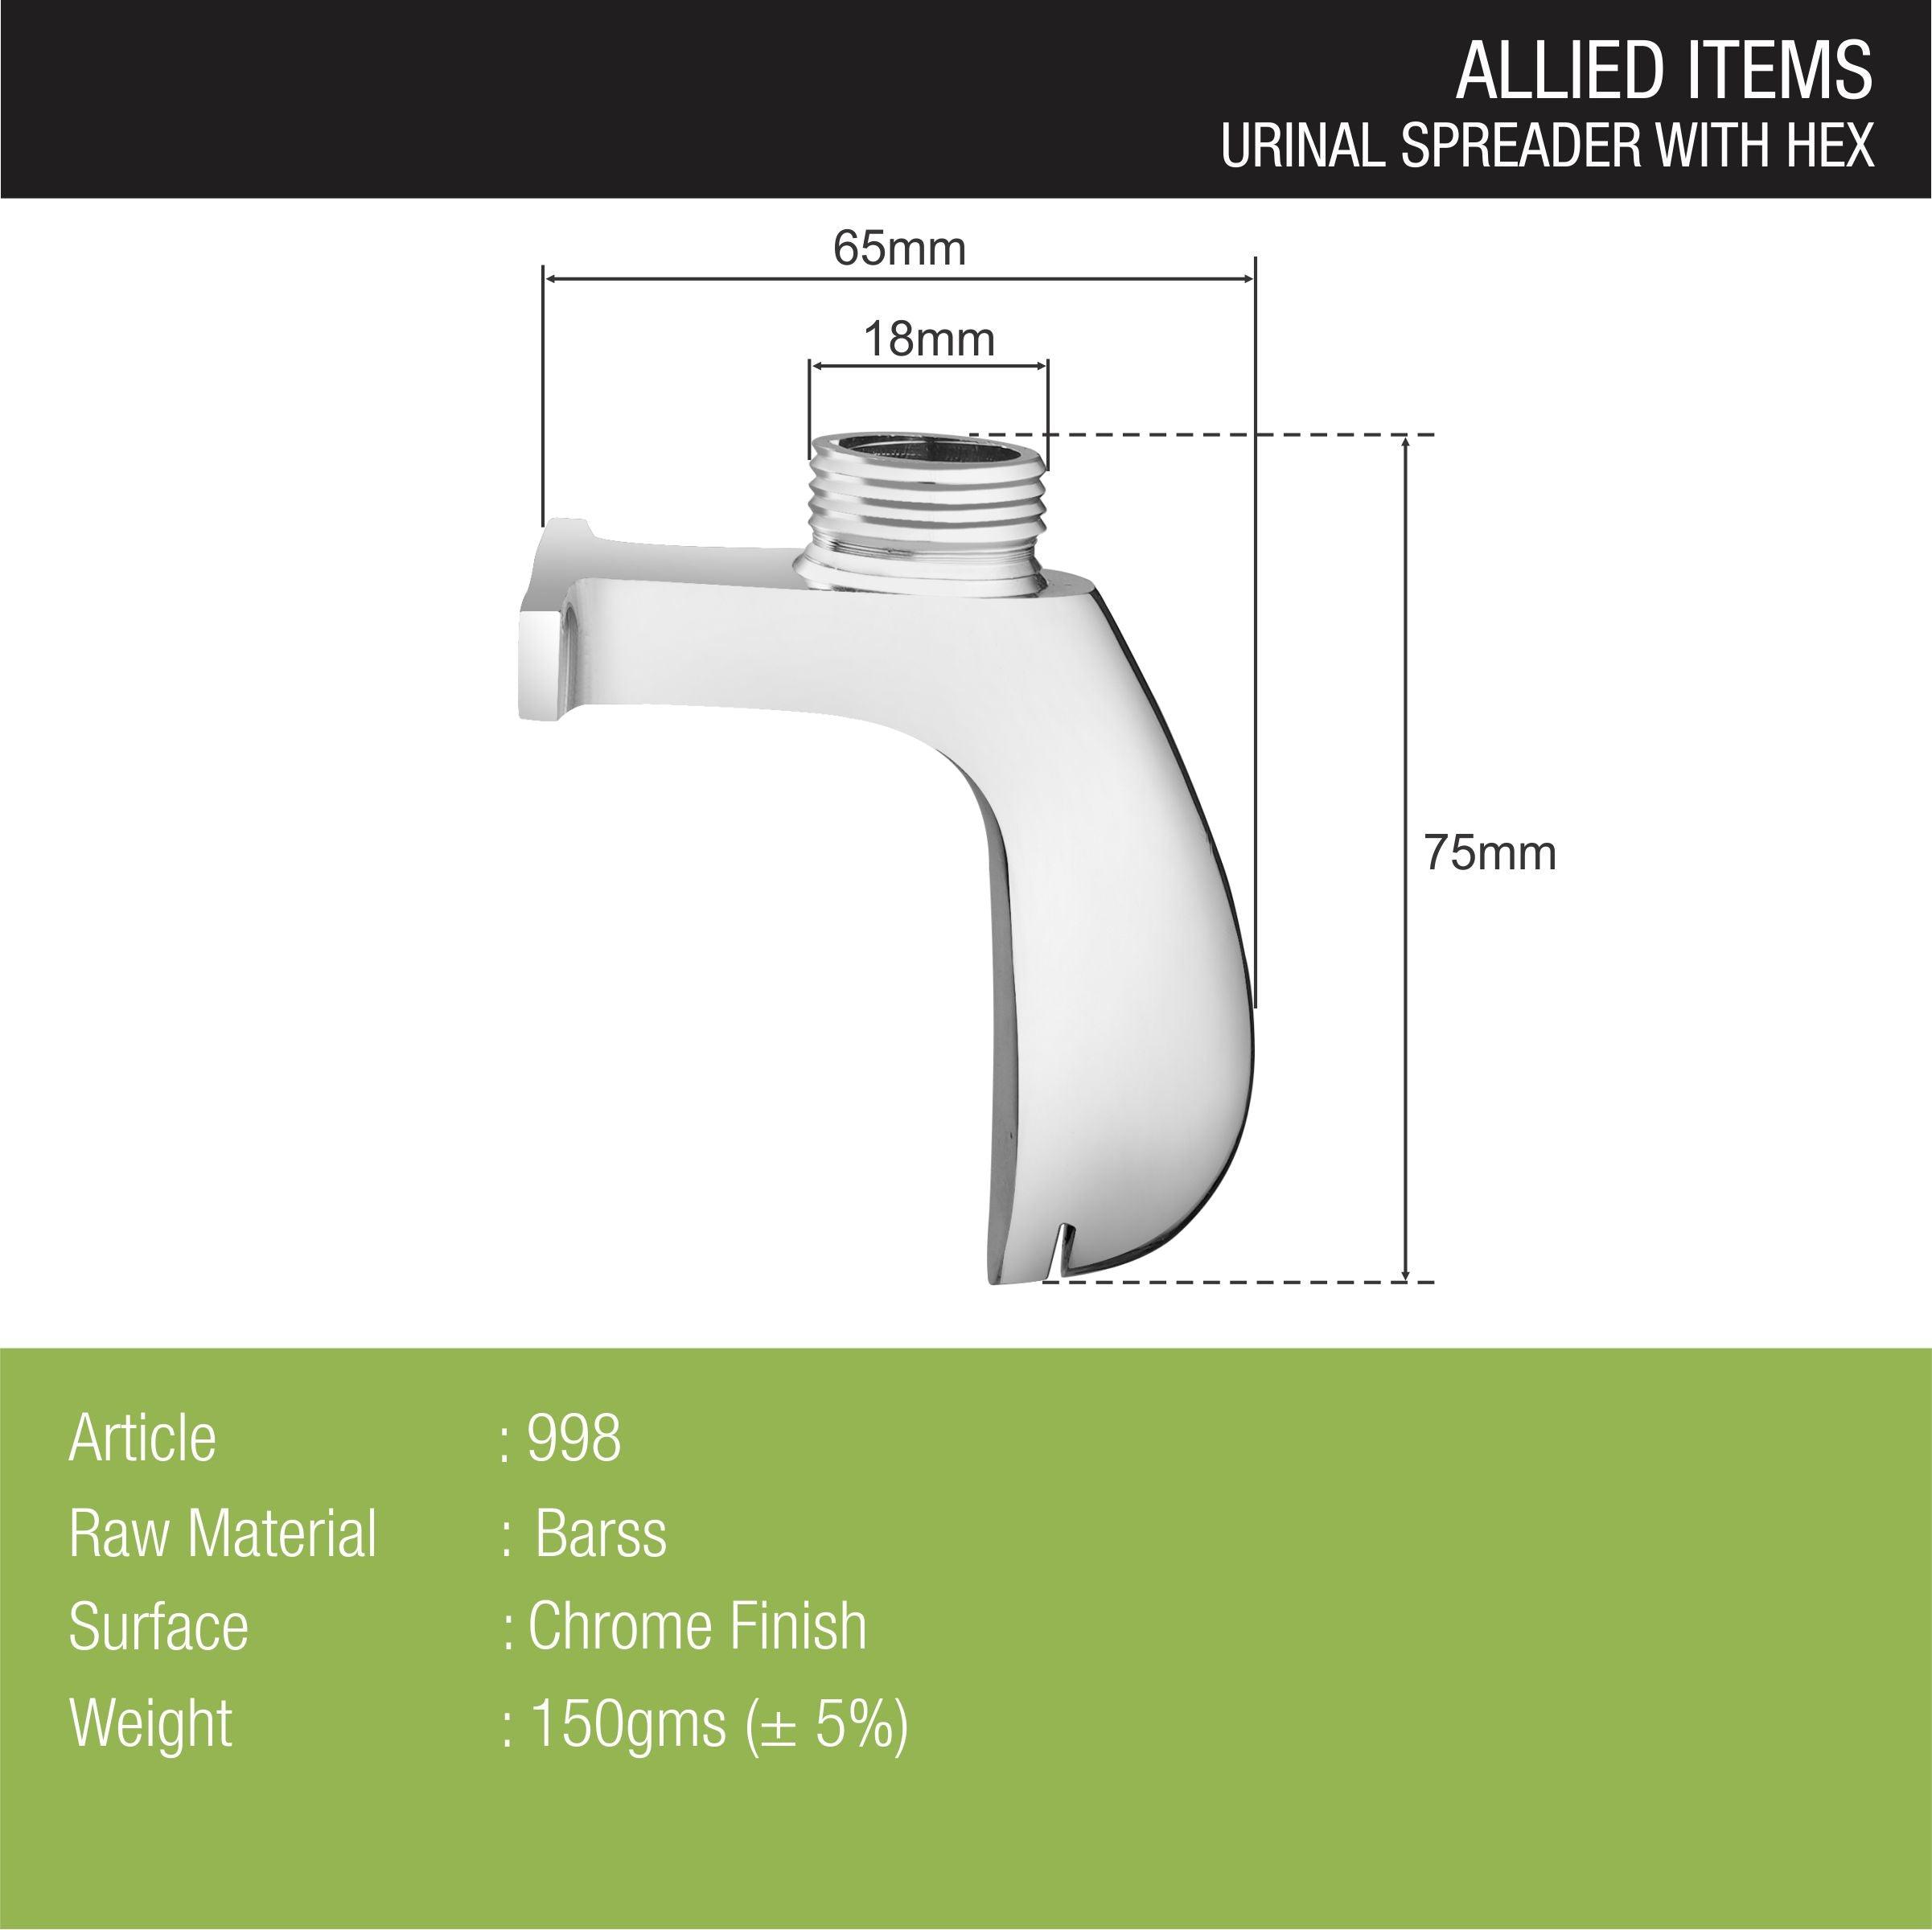 Urinal Spreader with Hex sizes and dimensions